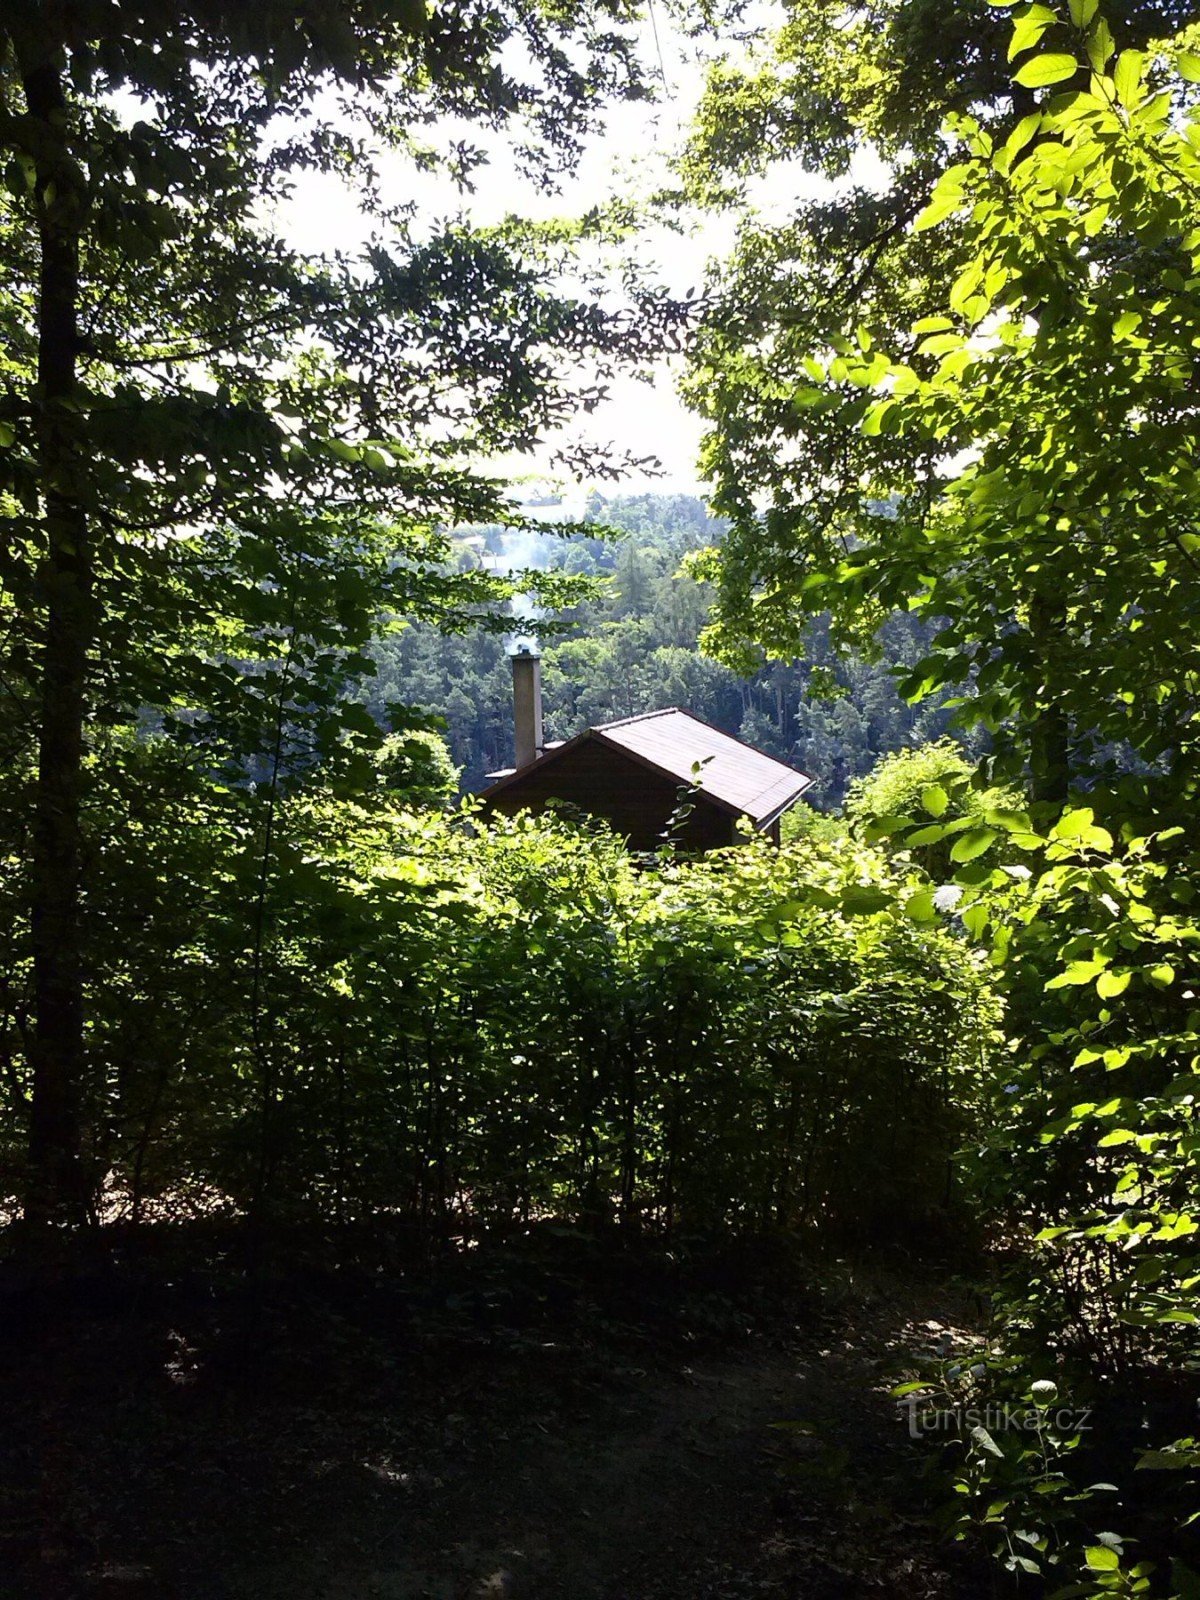 3. A cabin peeks out from the greenery